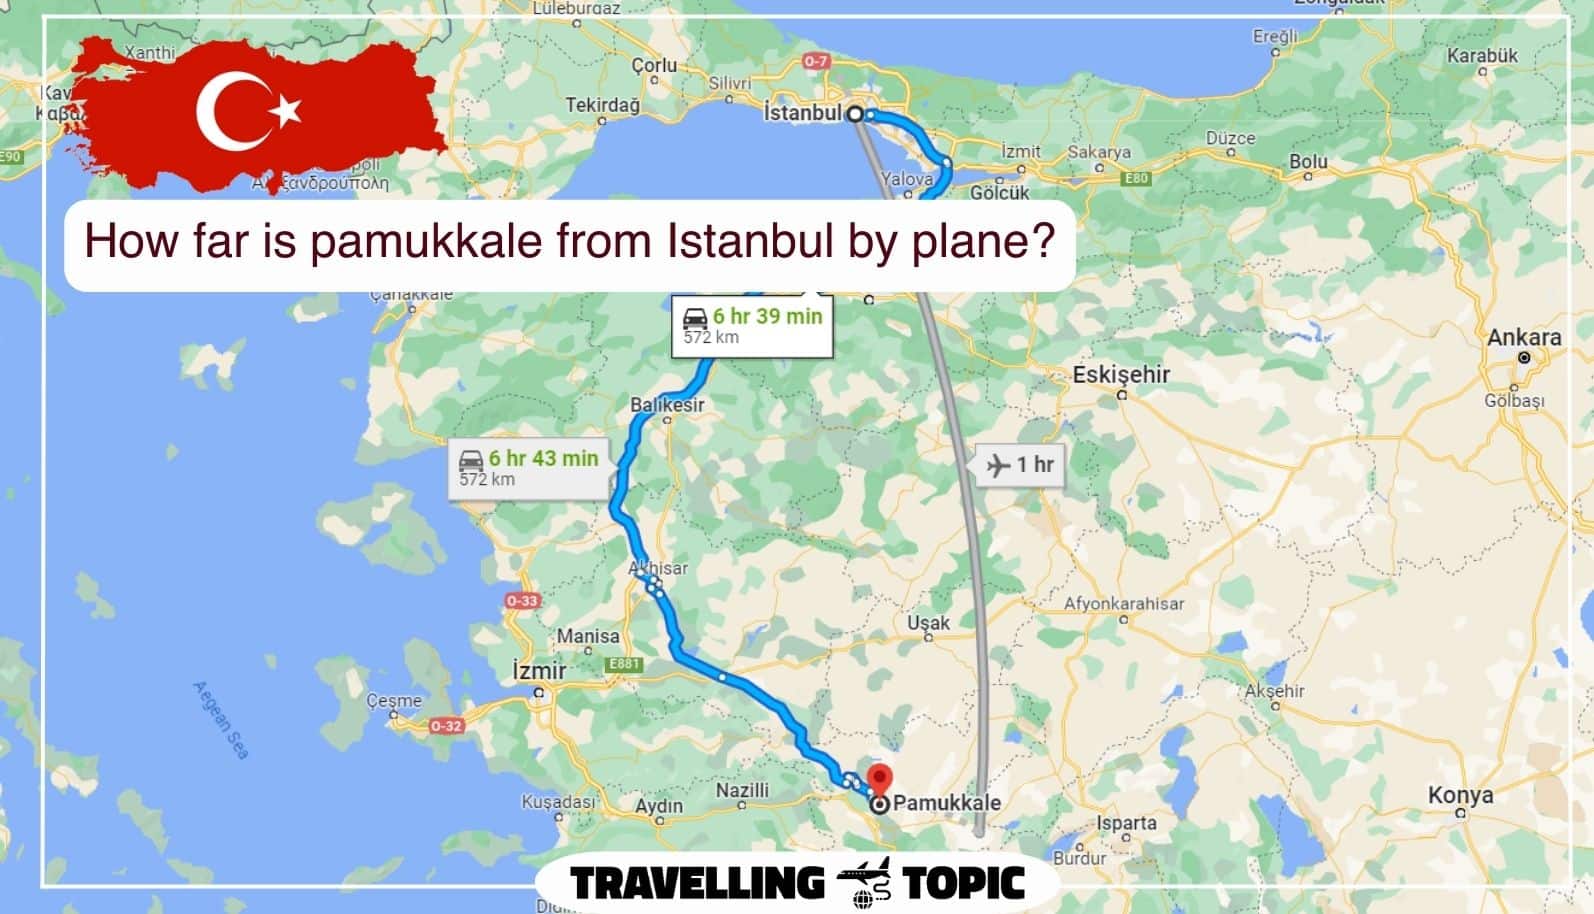 How far is pamukkale from Istanbul by plane